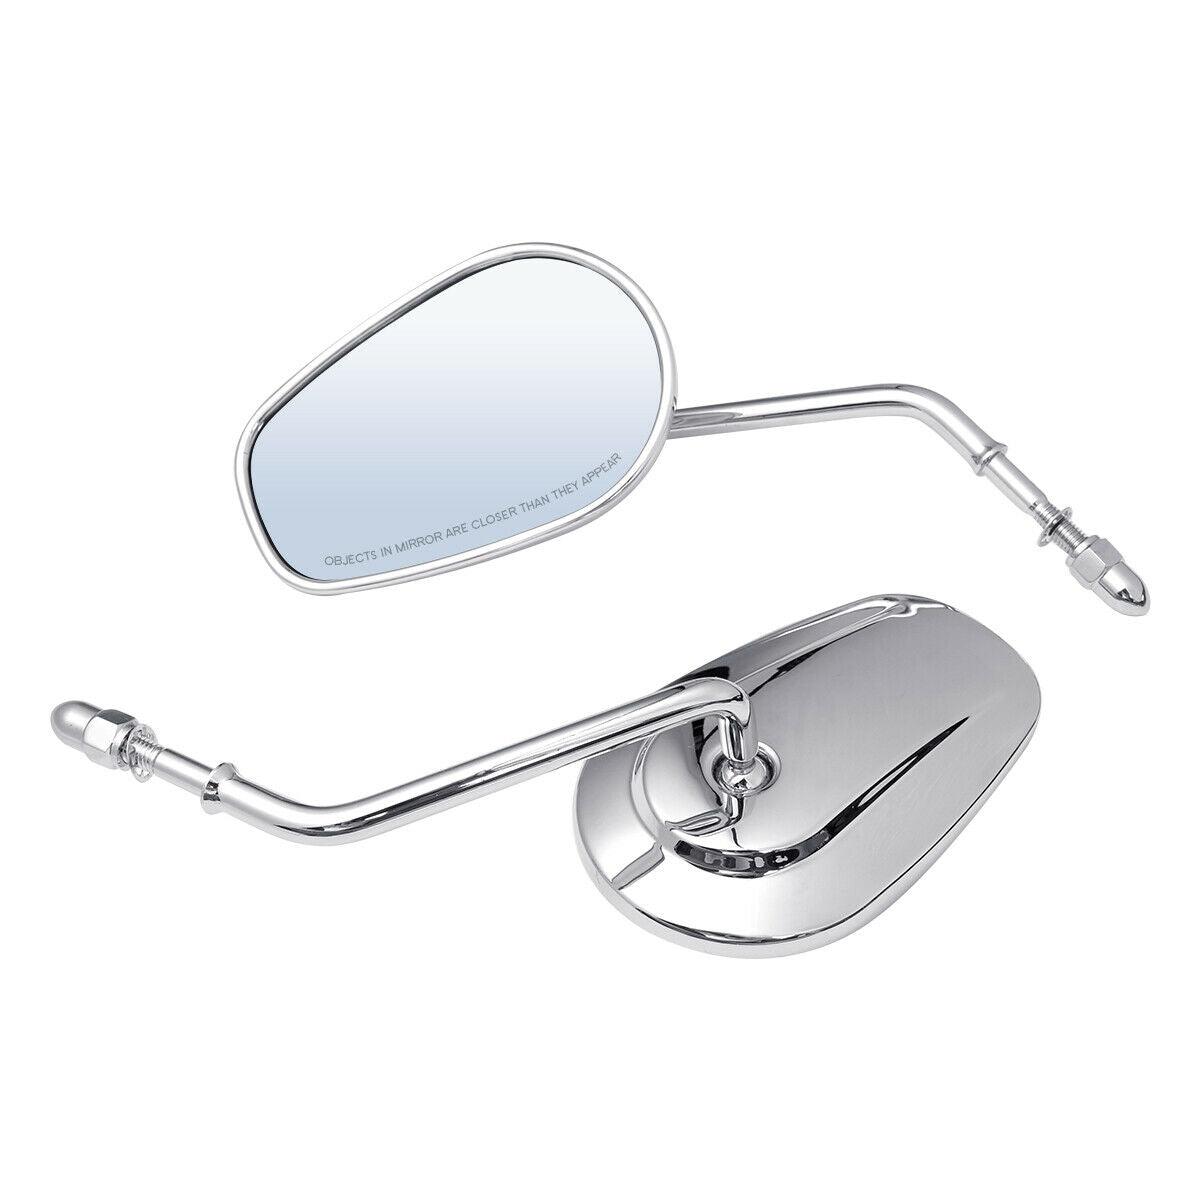 8mm Rearview Mirrors Fit For Harley Touring Road King Street Electra Road Glide - Moto Life Products